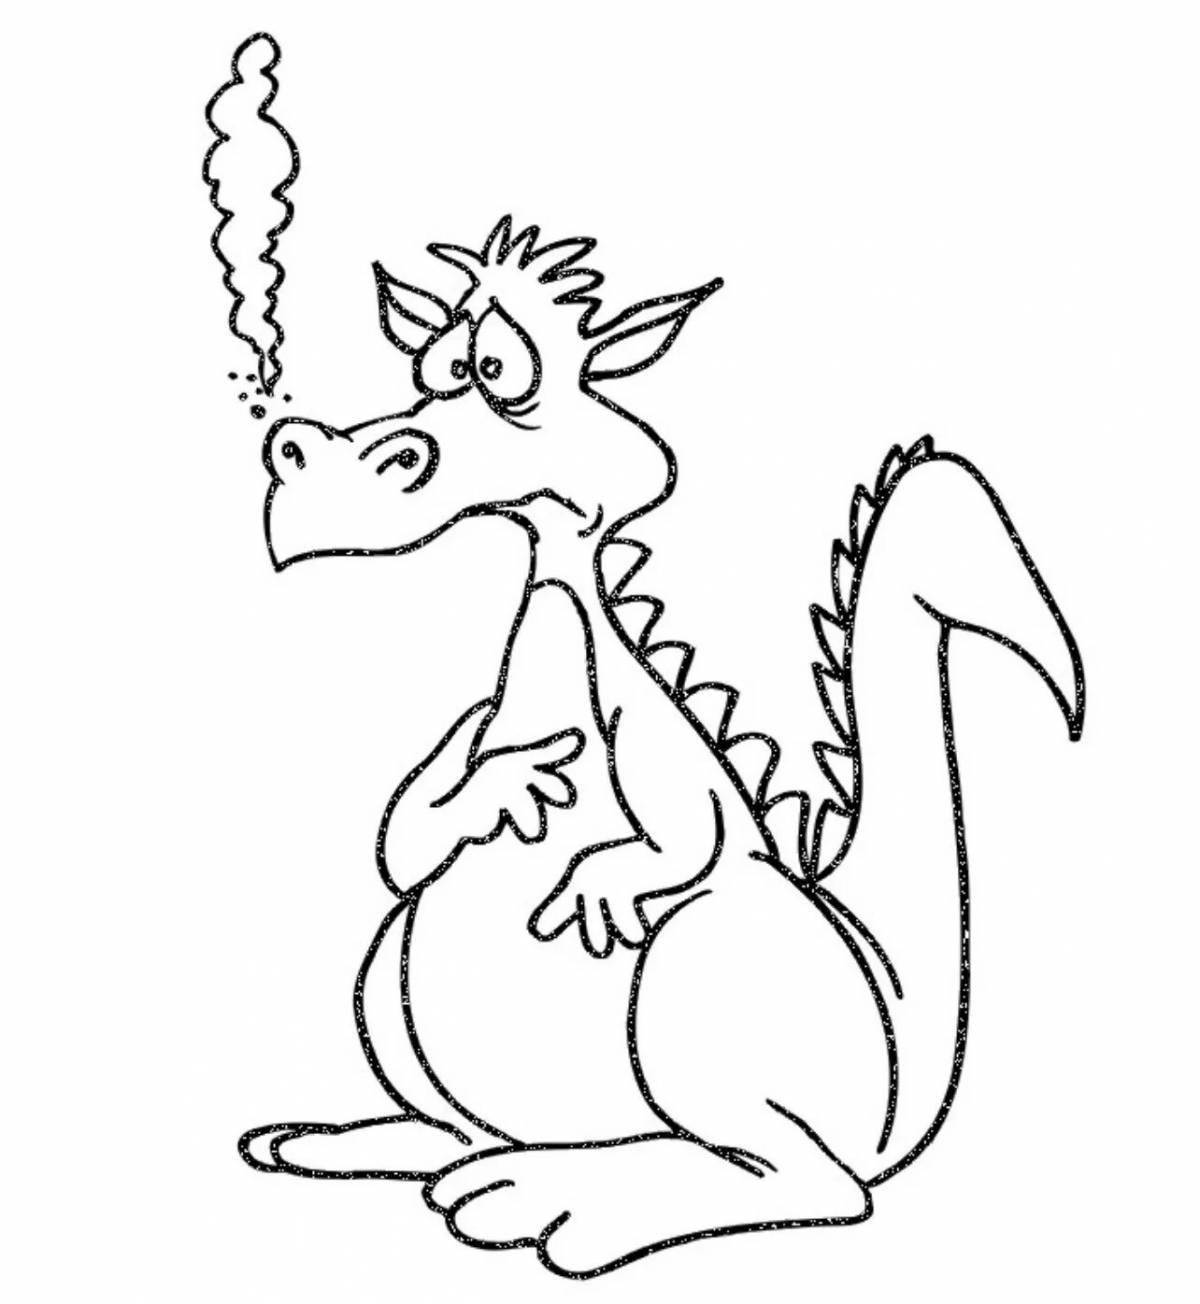 Amazing dragon coloring book for kids